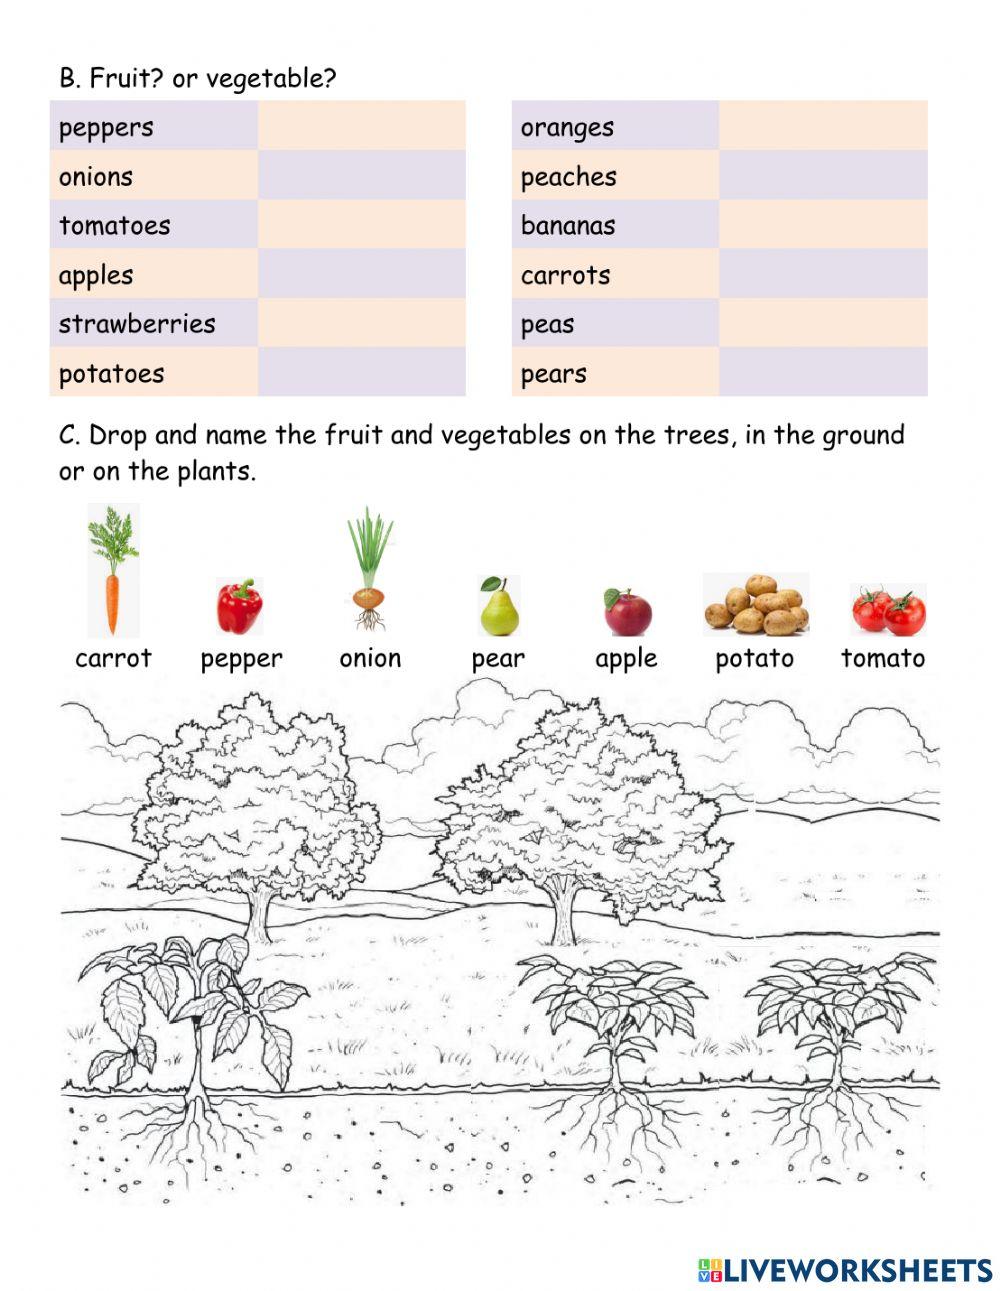 Unit 4.8 Lunchtime: Fruit and vegetable